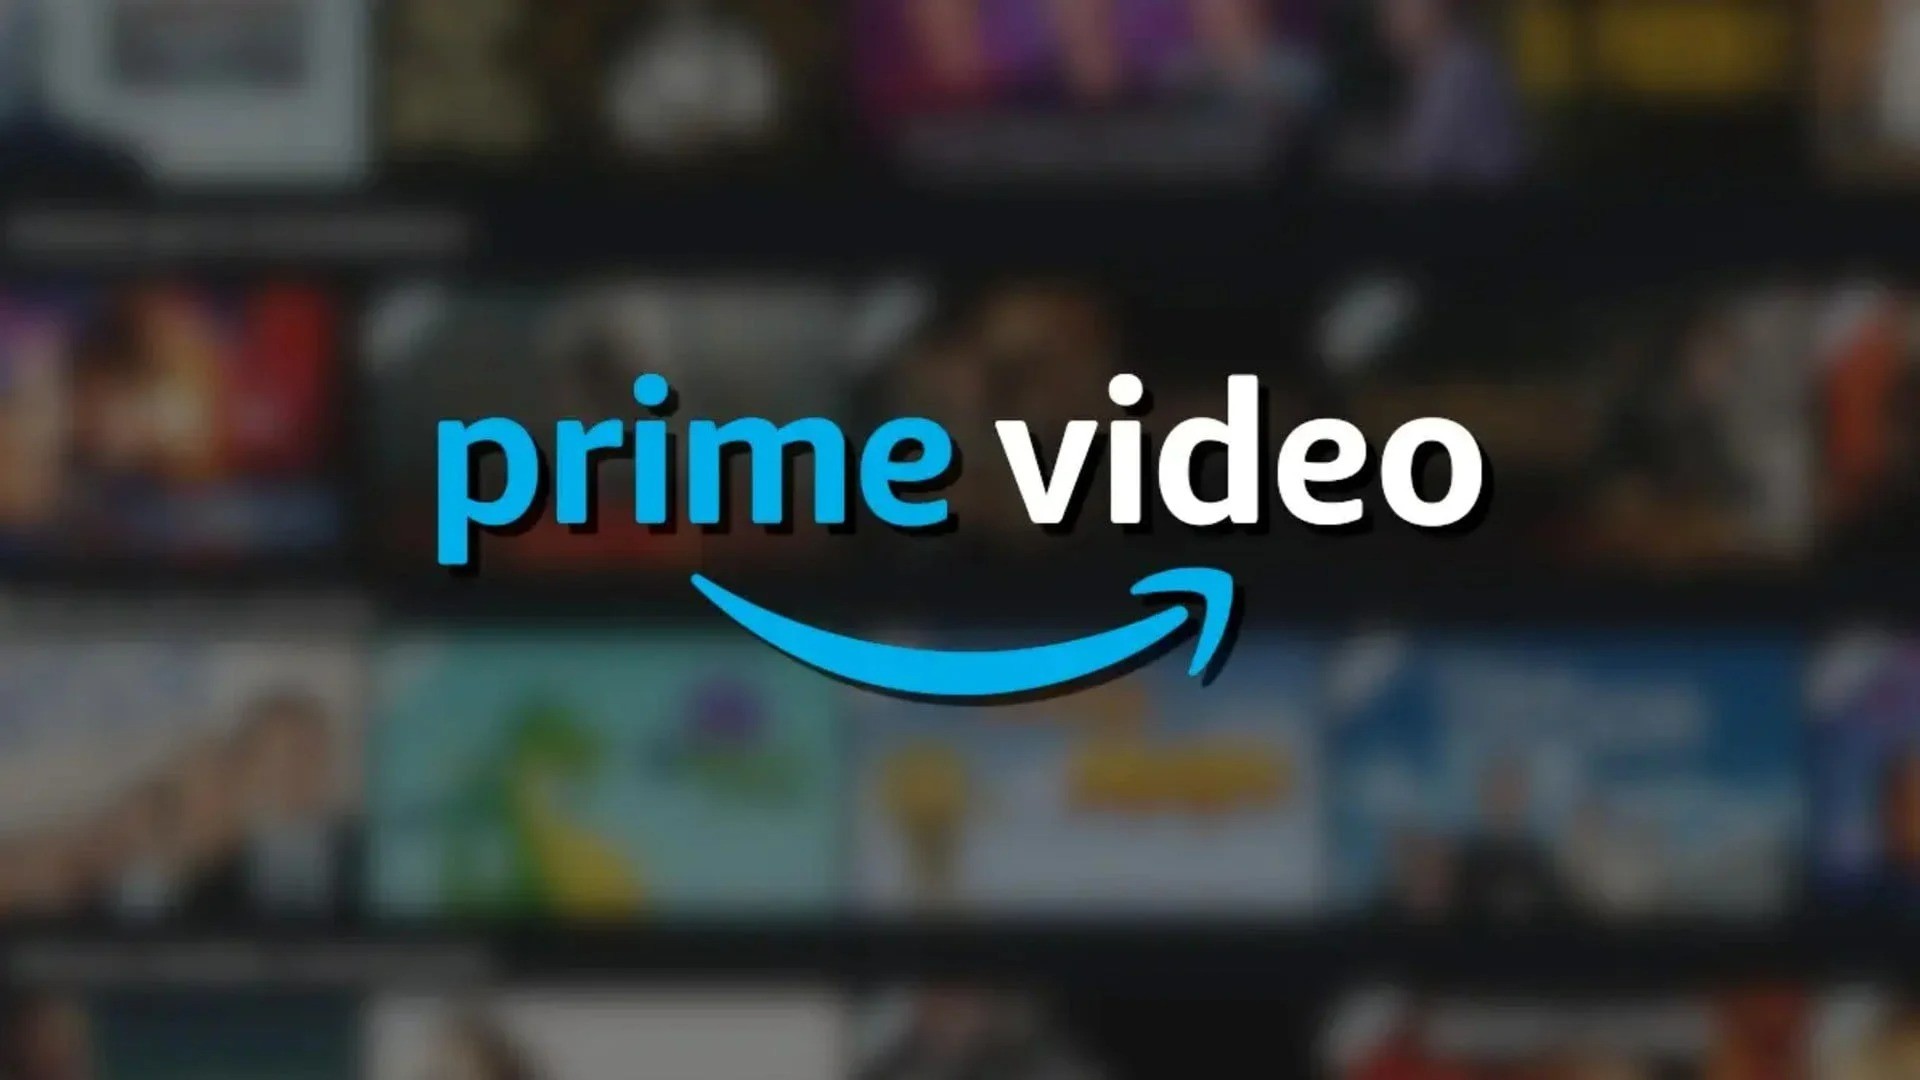 Prime Video 1 year Subscription Private account| Cashback | Guarantee |Auto Renew| The account for unlimited time